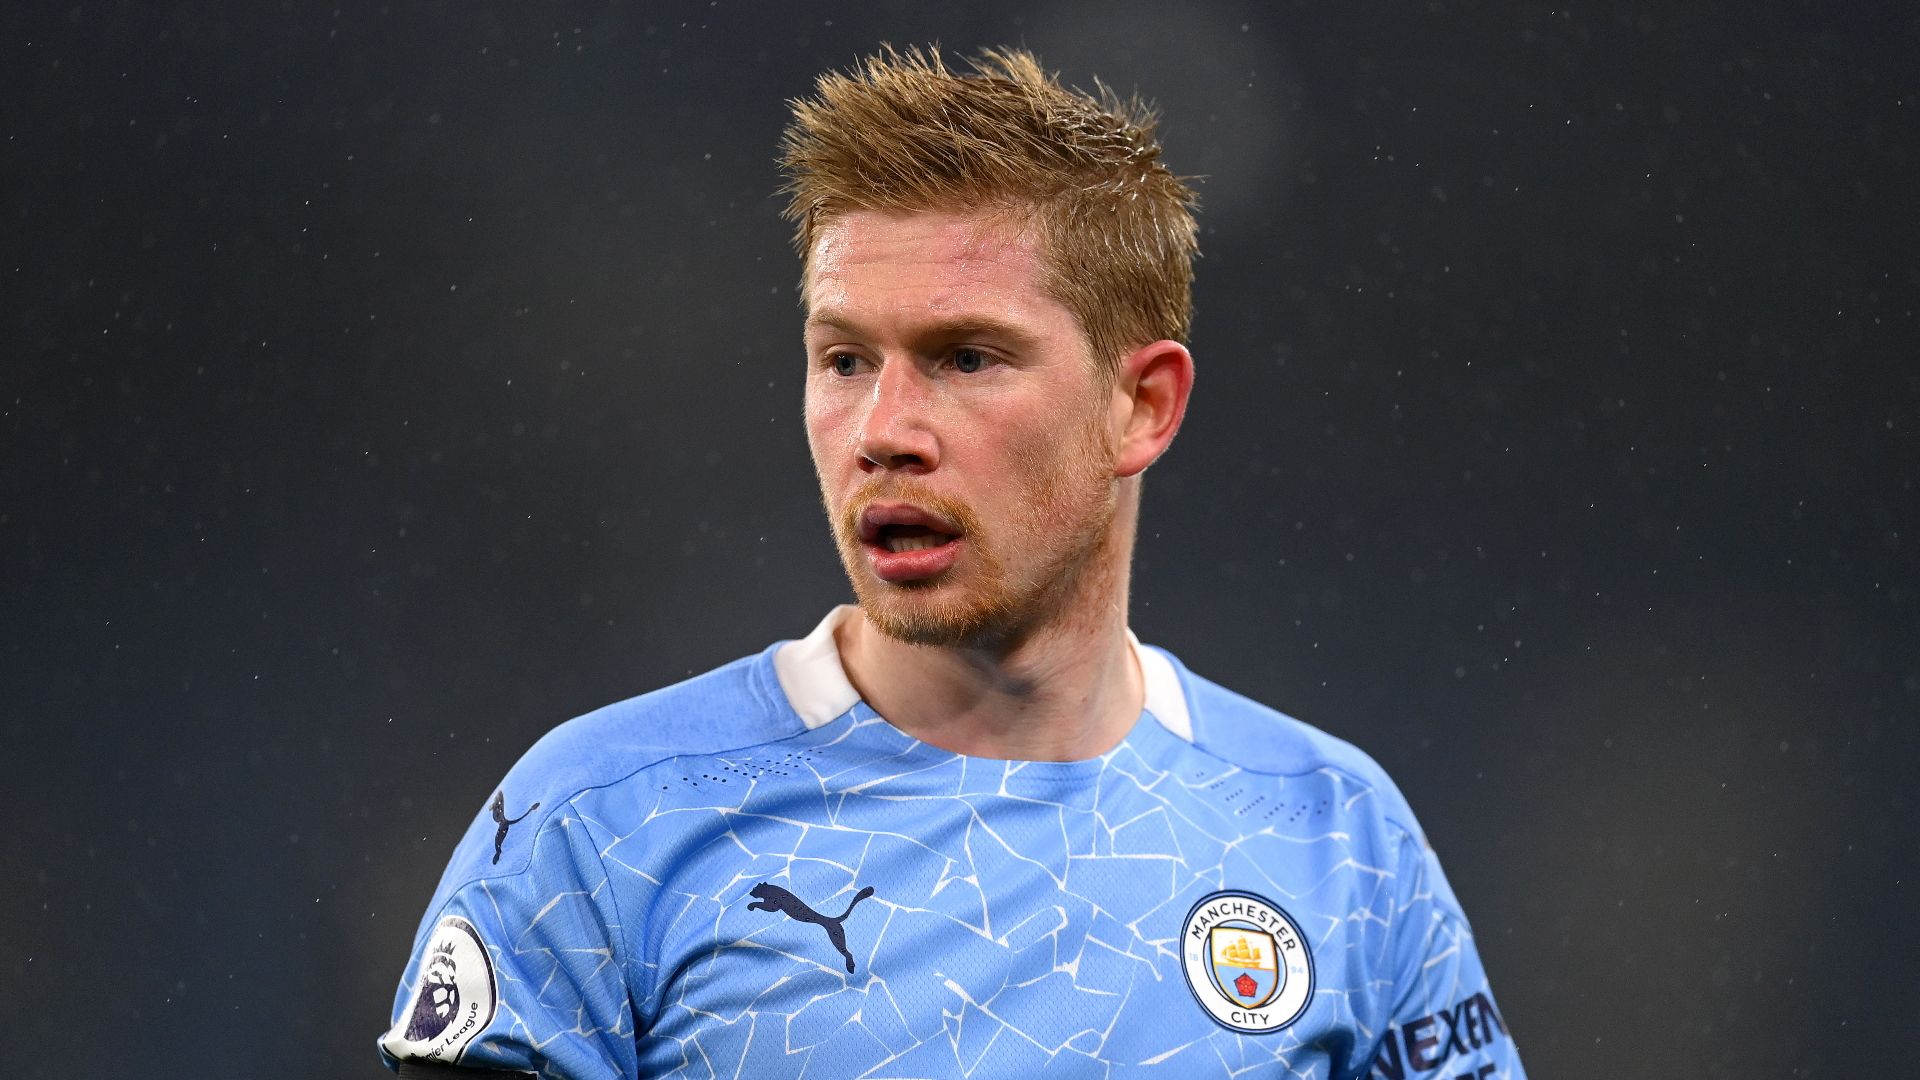 Guardiola gives 'really good' update on De Bruyne injury recovery as Manchester City face key fixtures